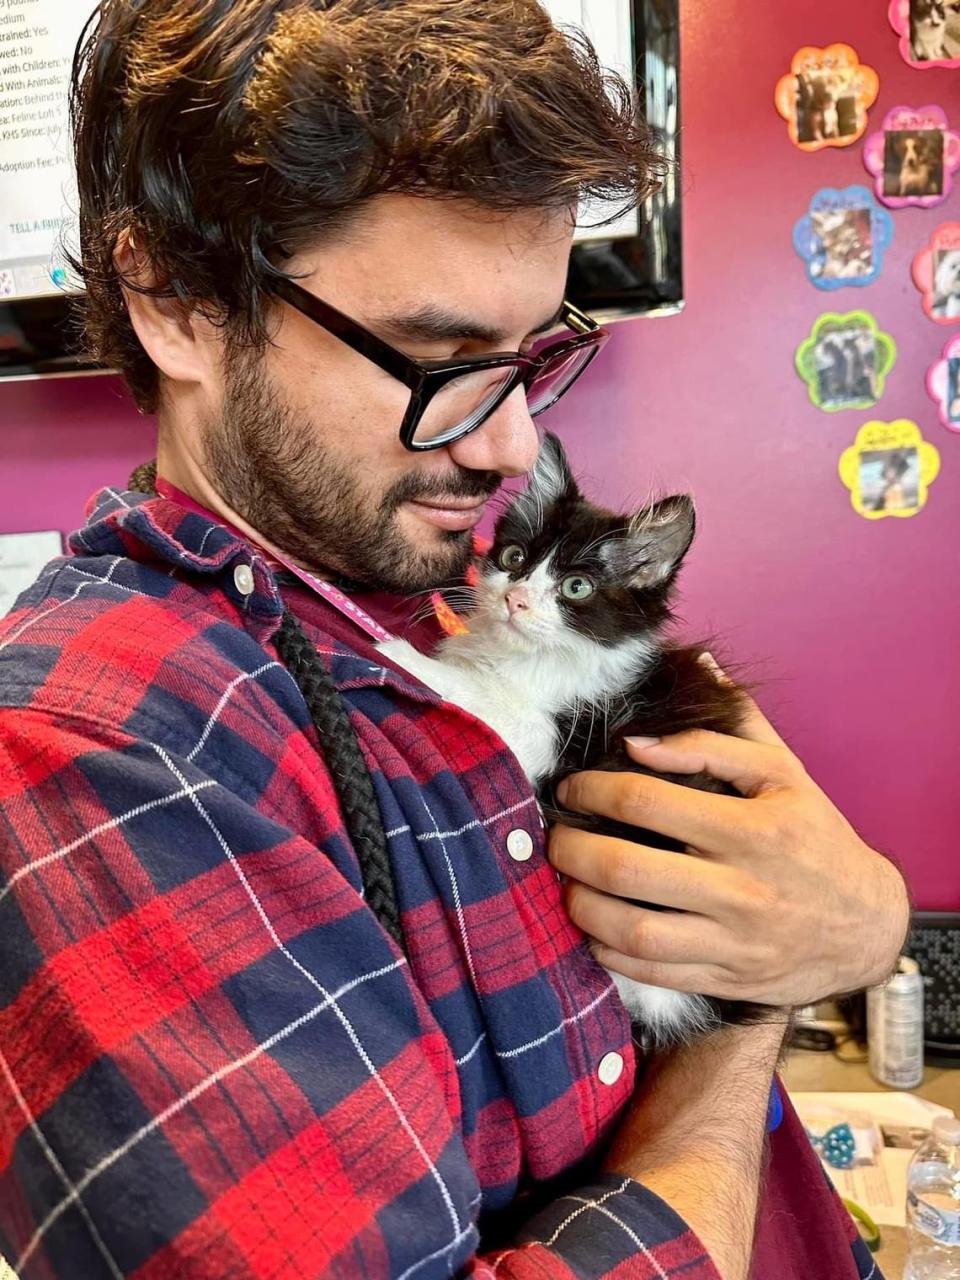 Kansas Humane Society director of marketing and communications Jordan Bani-Younes with Loki, the mama cat he is fostering in his office along with her two babies, Sif and Valkyrie.